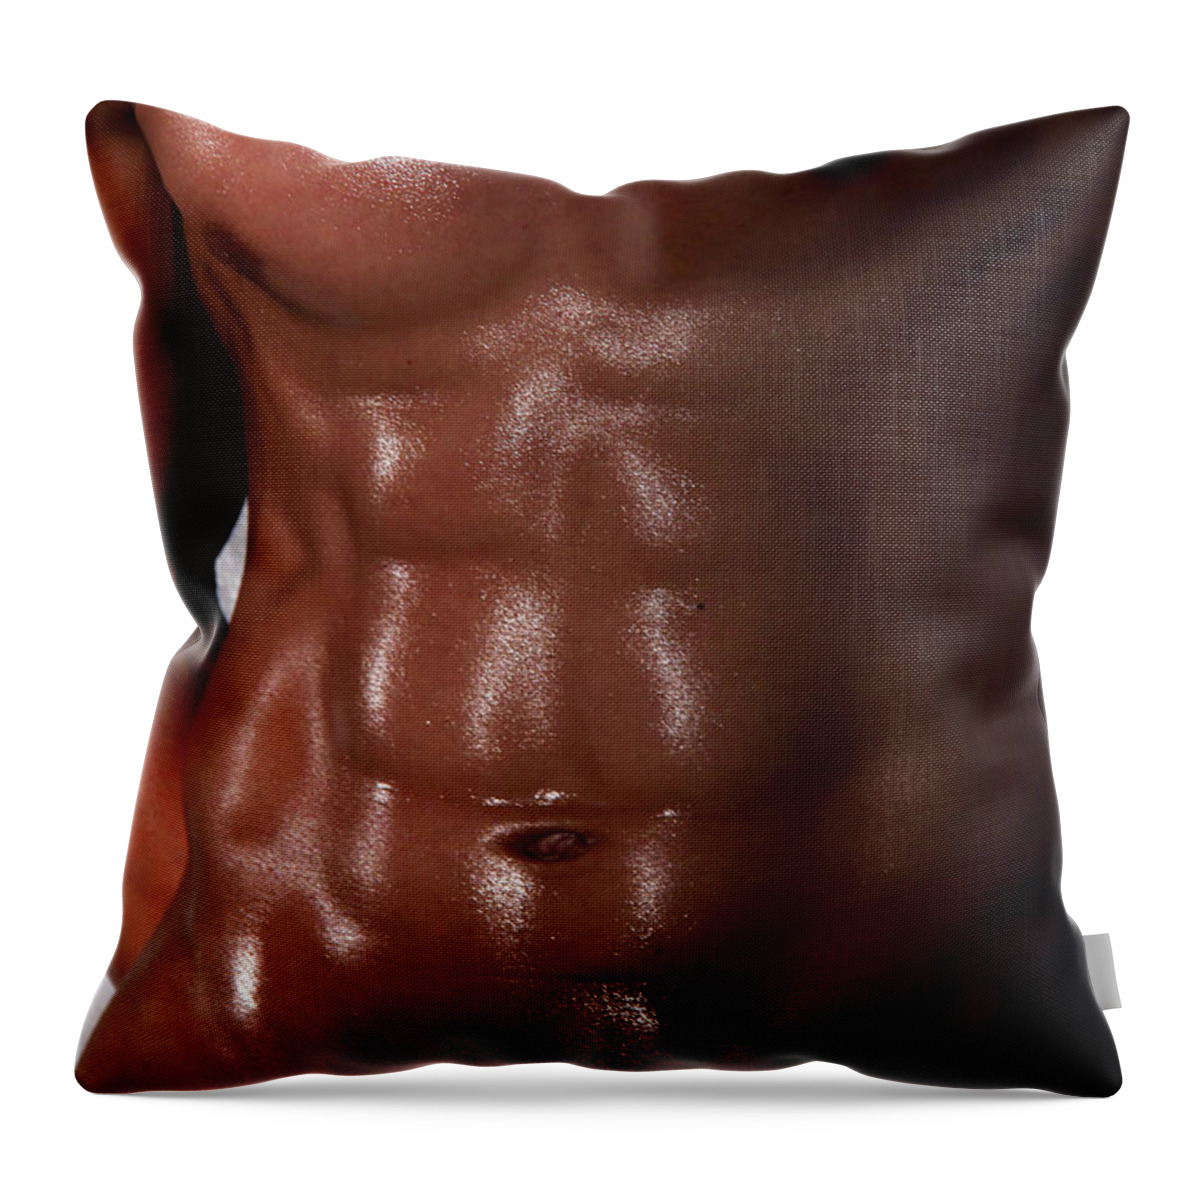 Male Nude Photos Throw Pillow featuring the photograph Muscle Man by Mark Ashkenazi